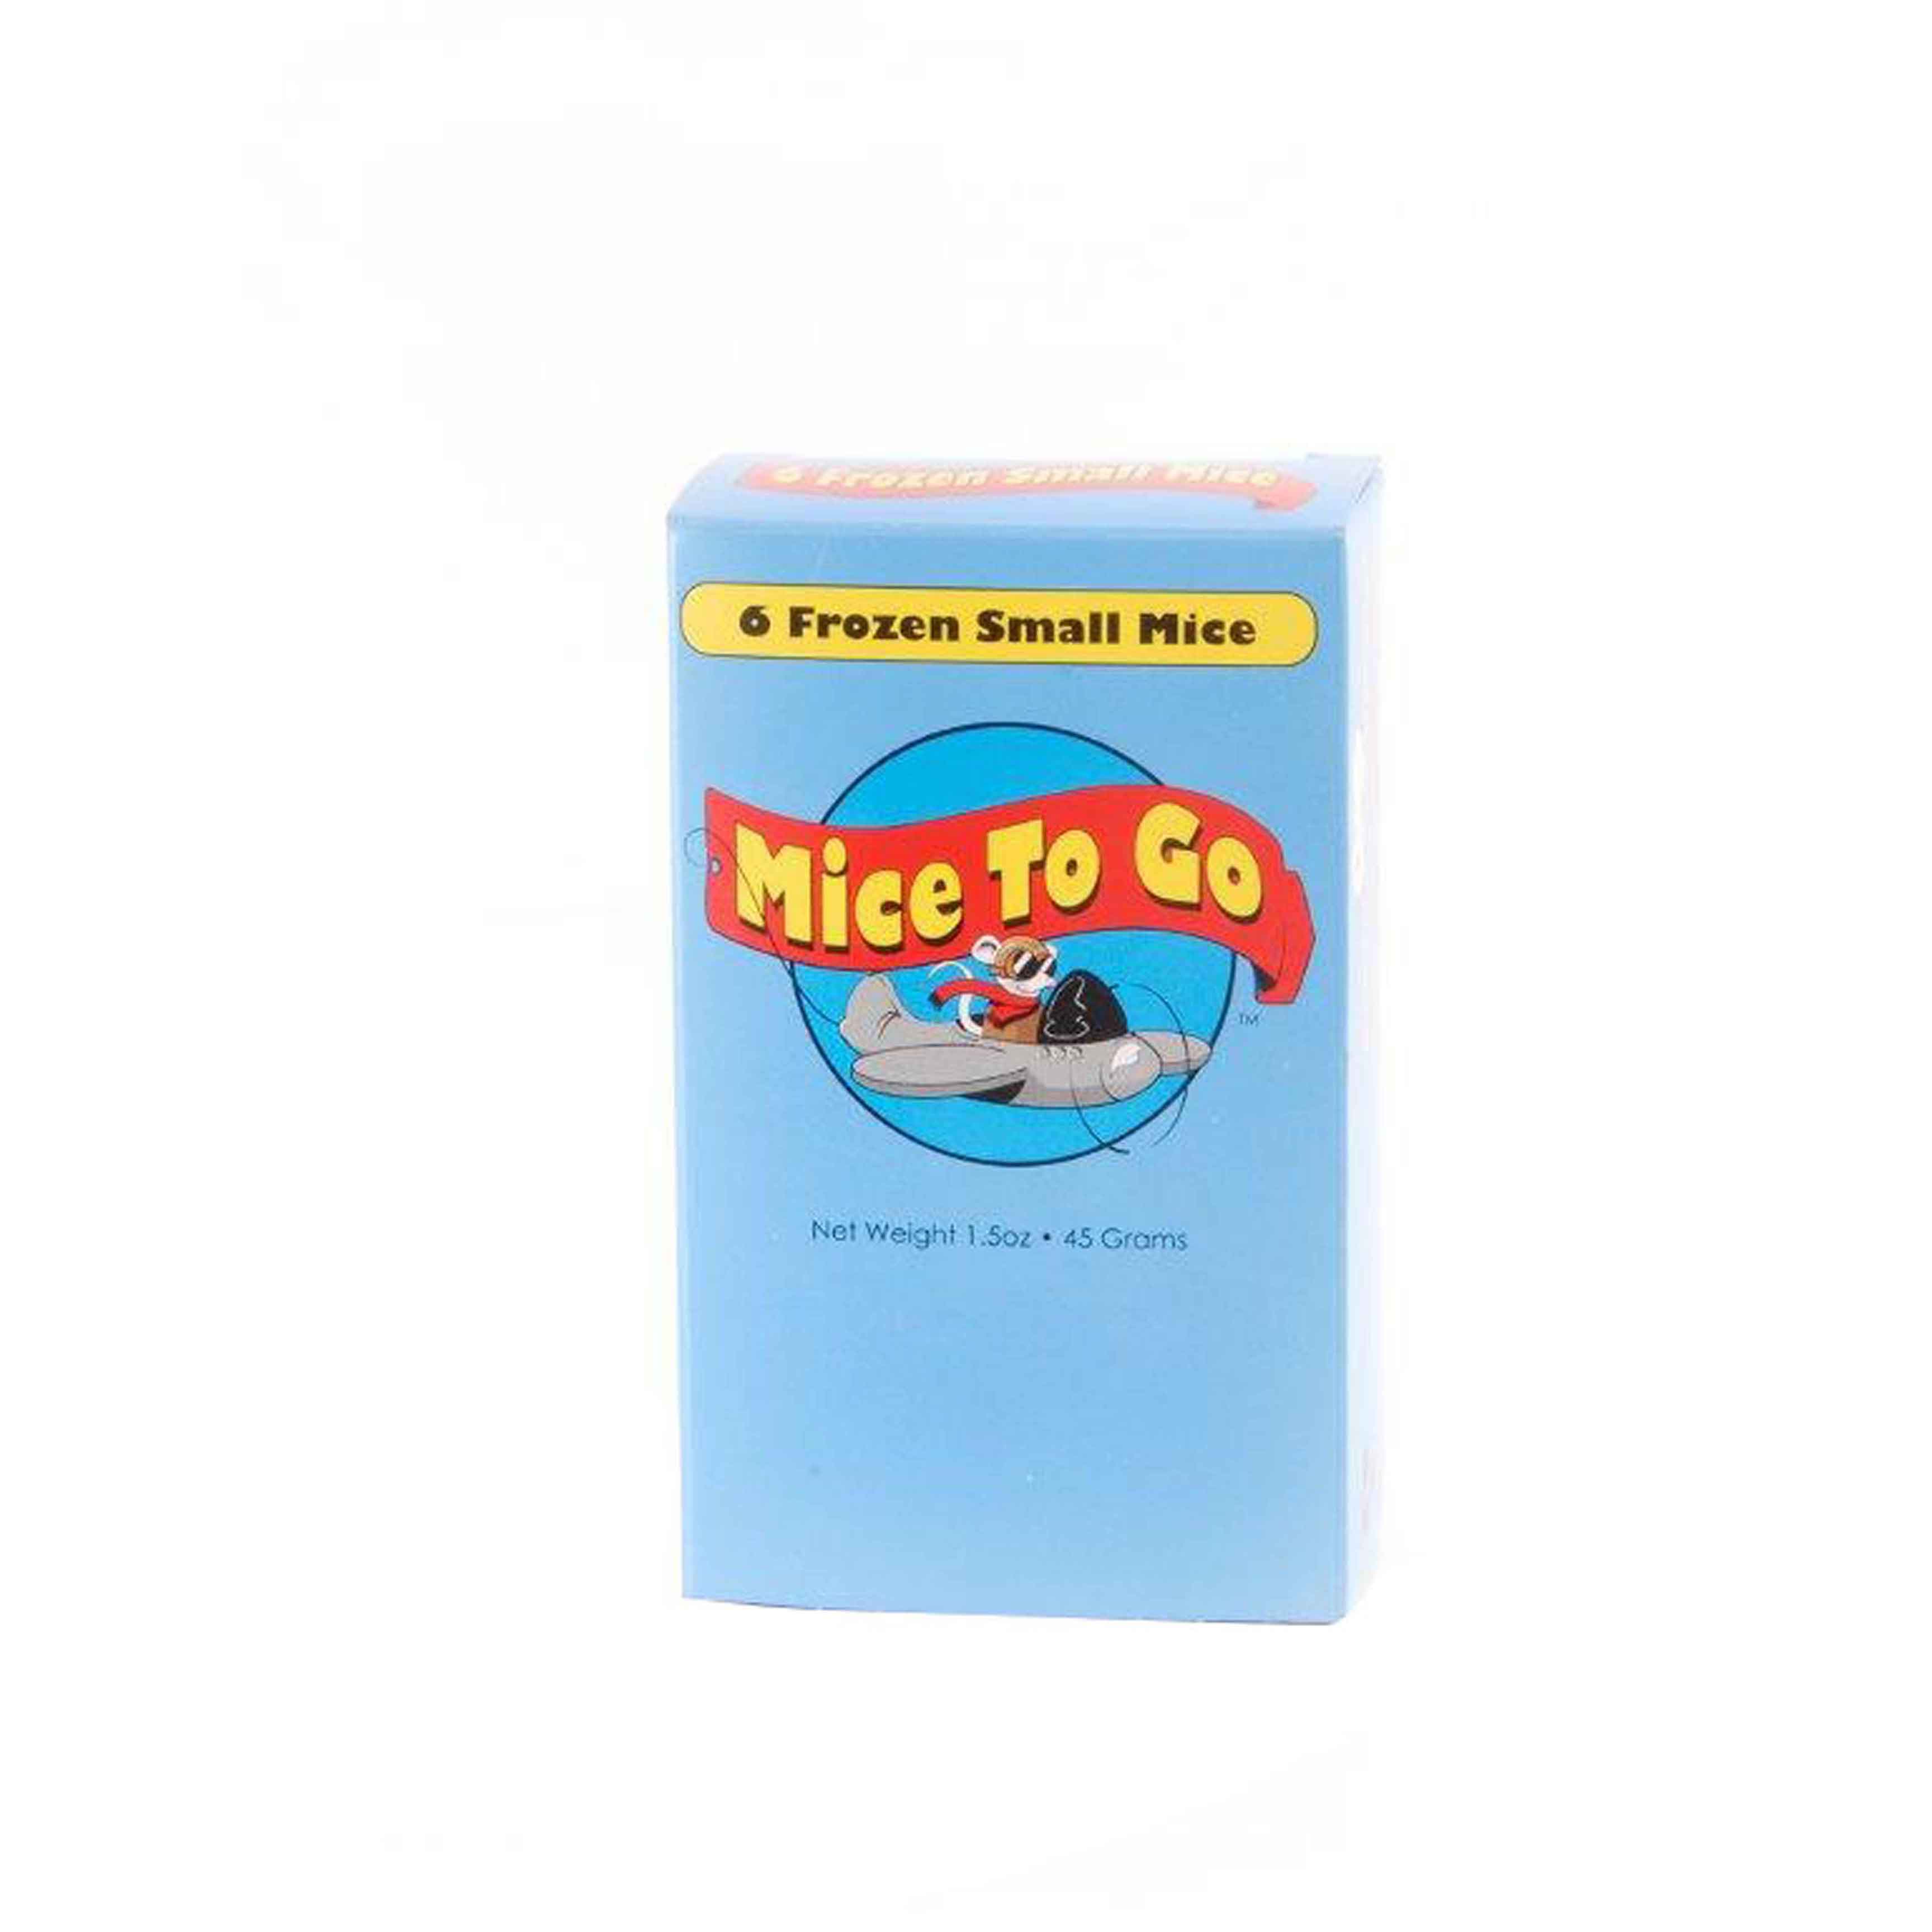 Mice To Go Small Mouse 6ct